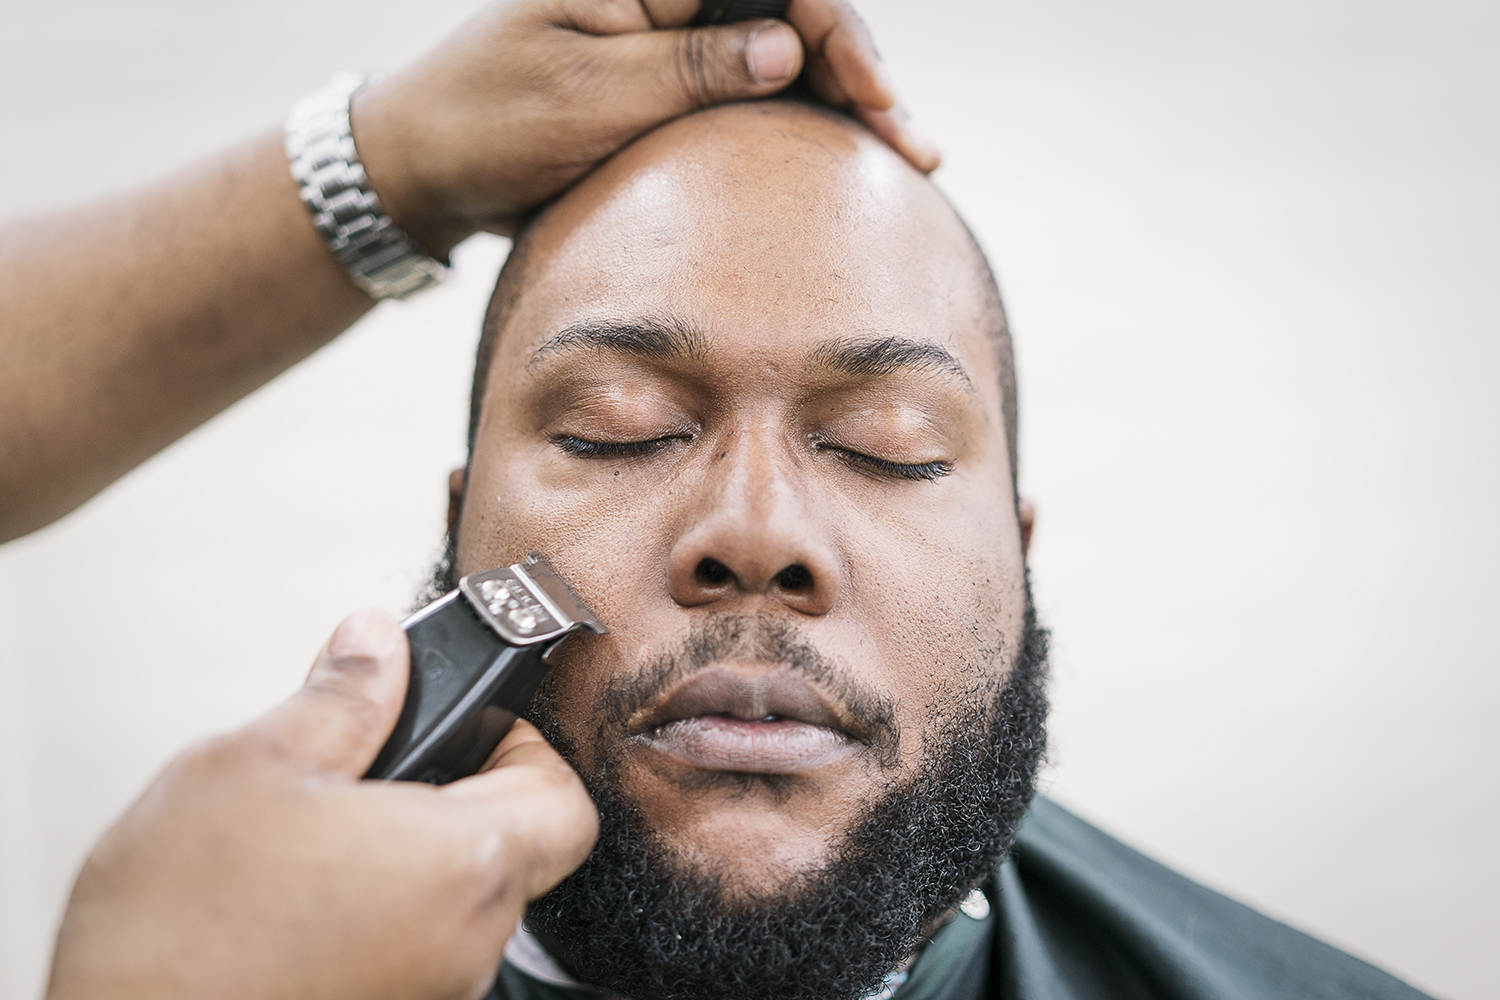 Flint, MI - Tuesday, February 6, 2018: Flint resident Brandon Ashley, 34, closes his eyes and relaxes while he receives a haircut and beard trim at the Flint Institute of Barbering.